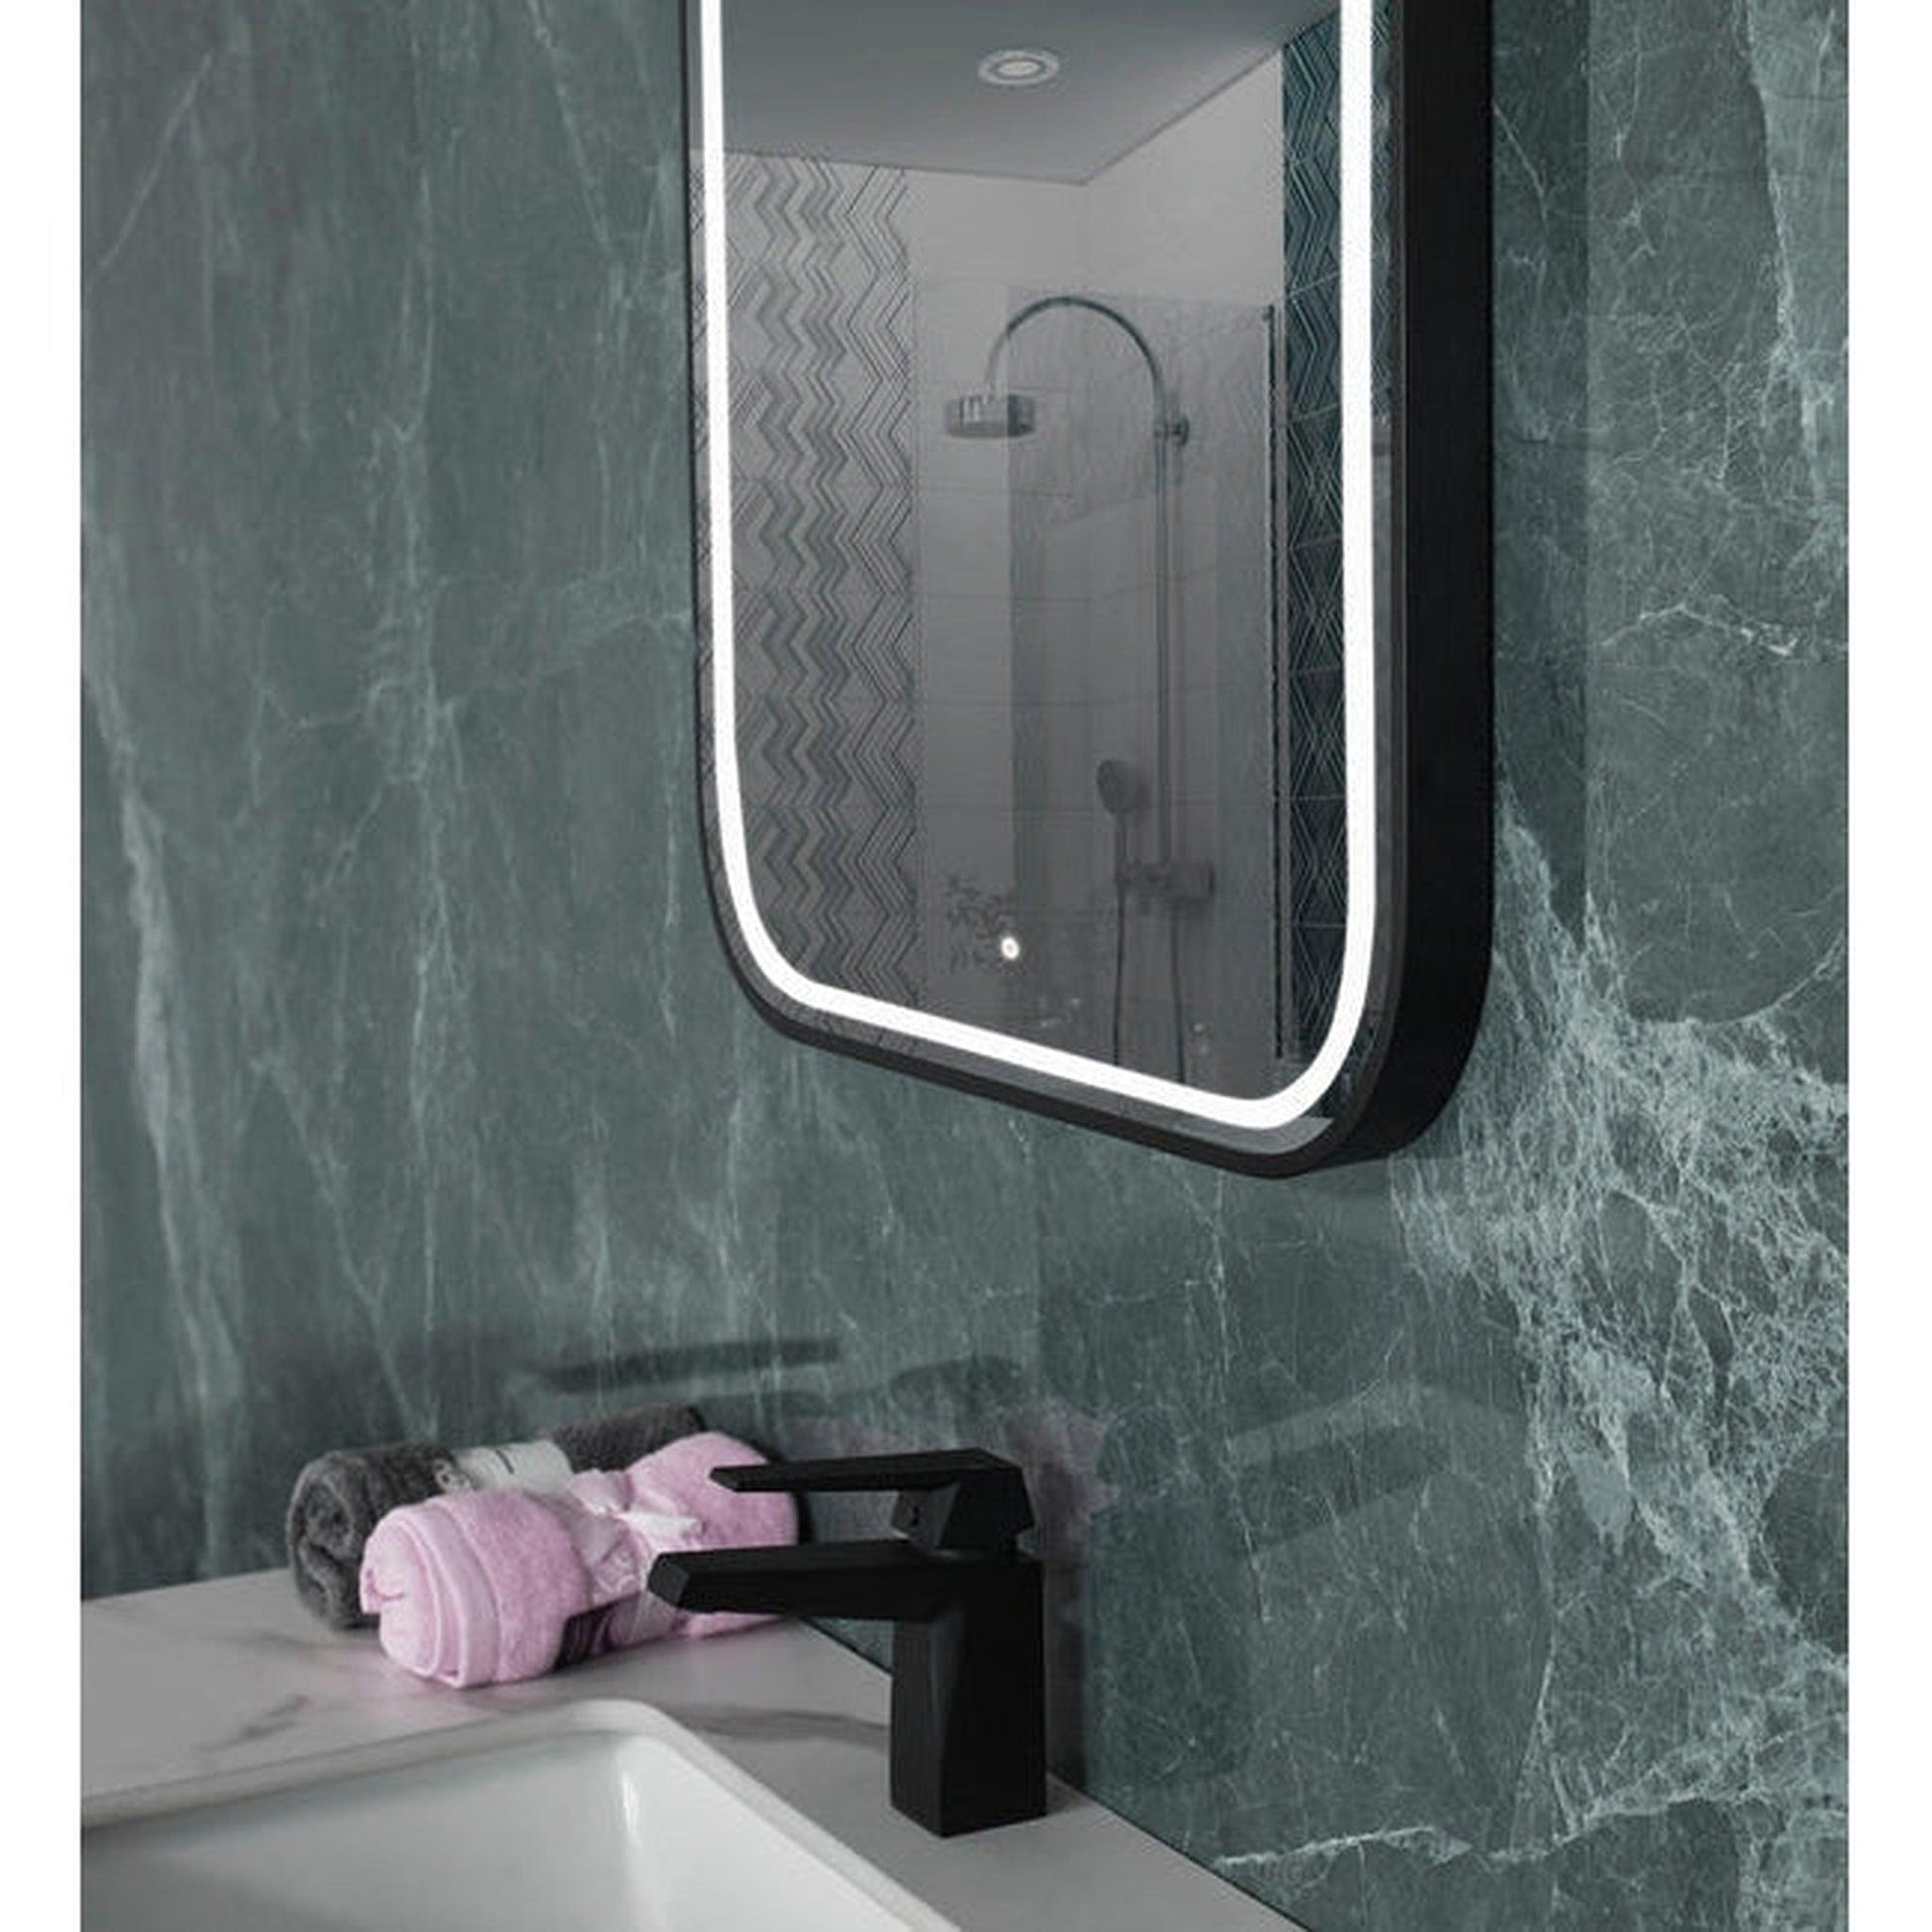 Vanity Art 24" W x 32" H Black Rounded Corner Frame LED Lighted Bathroom Vanity Wall Mirror With Touch Sensor